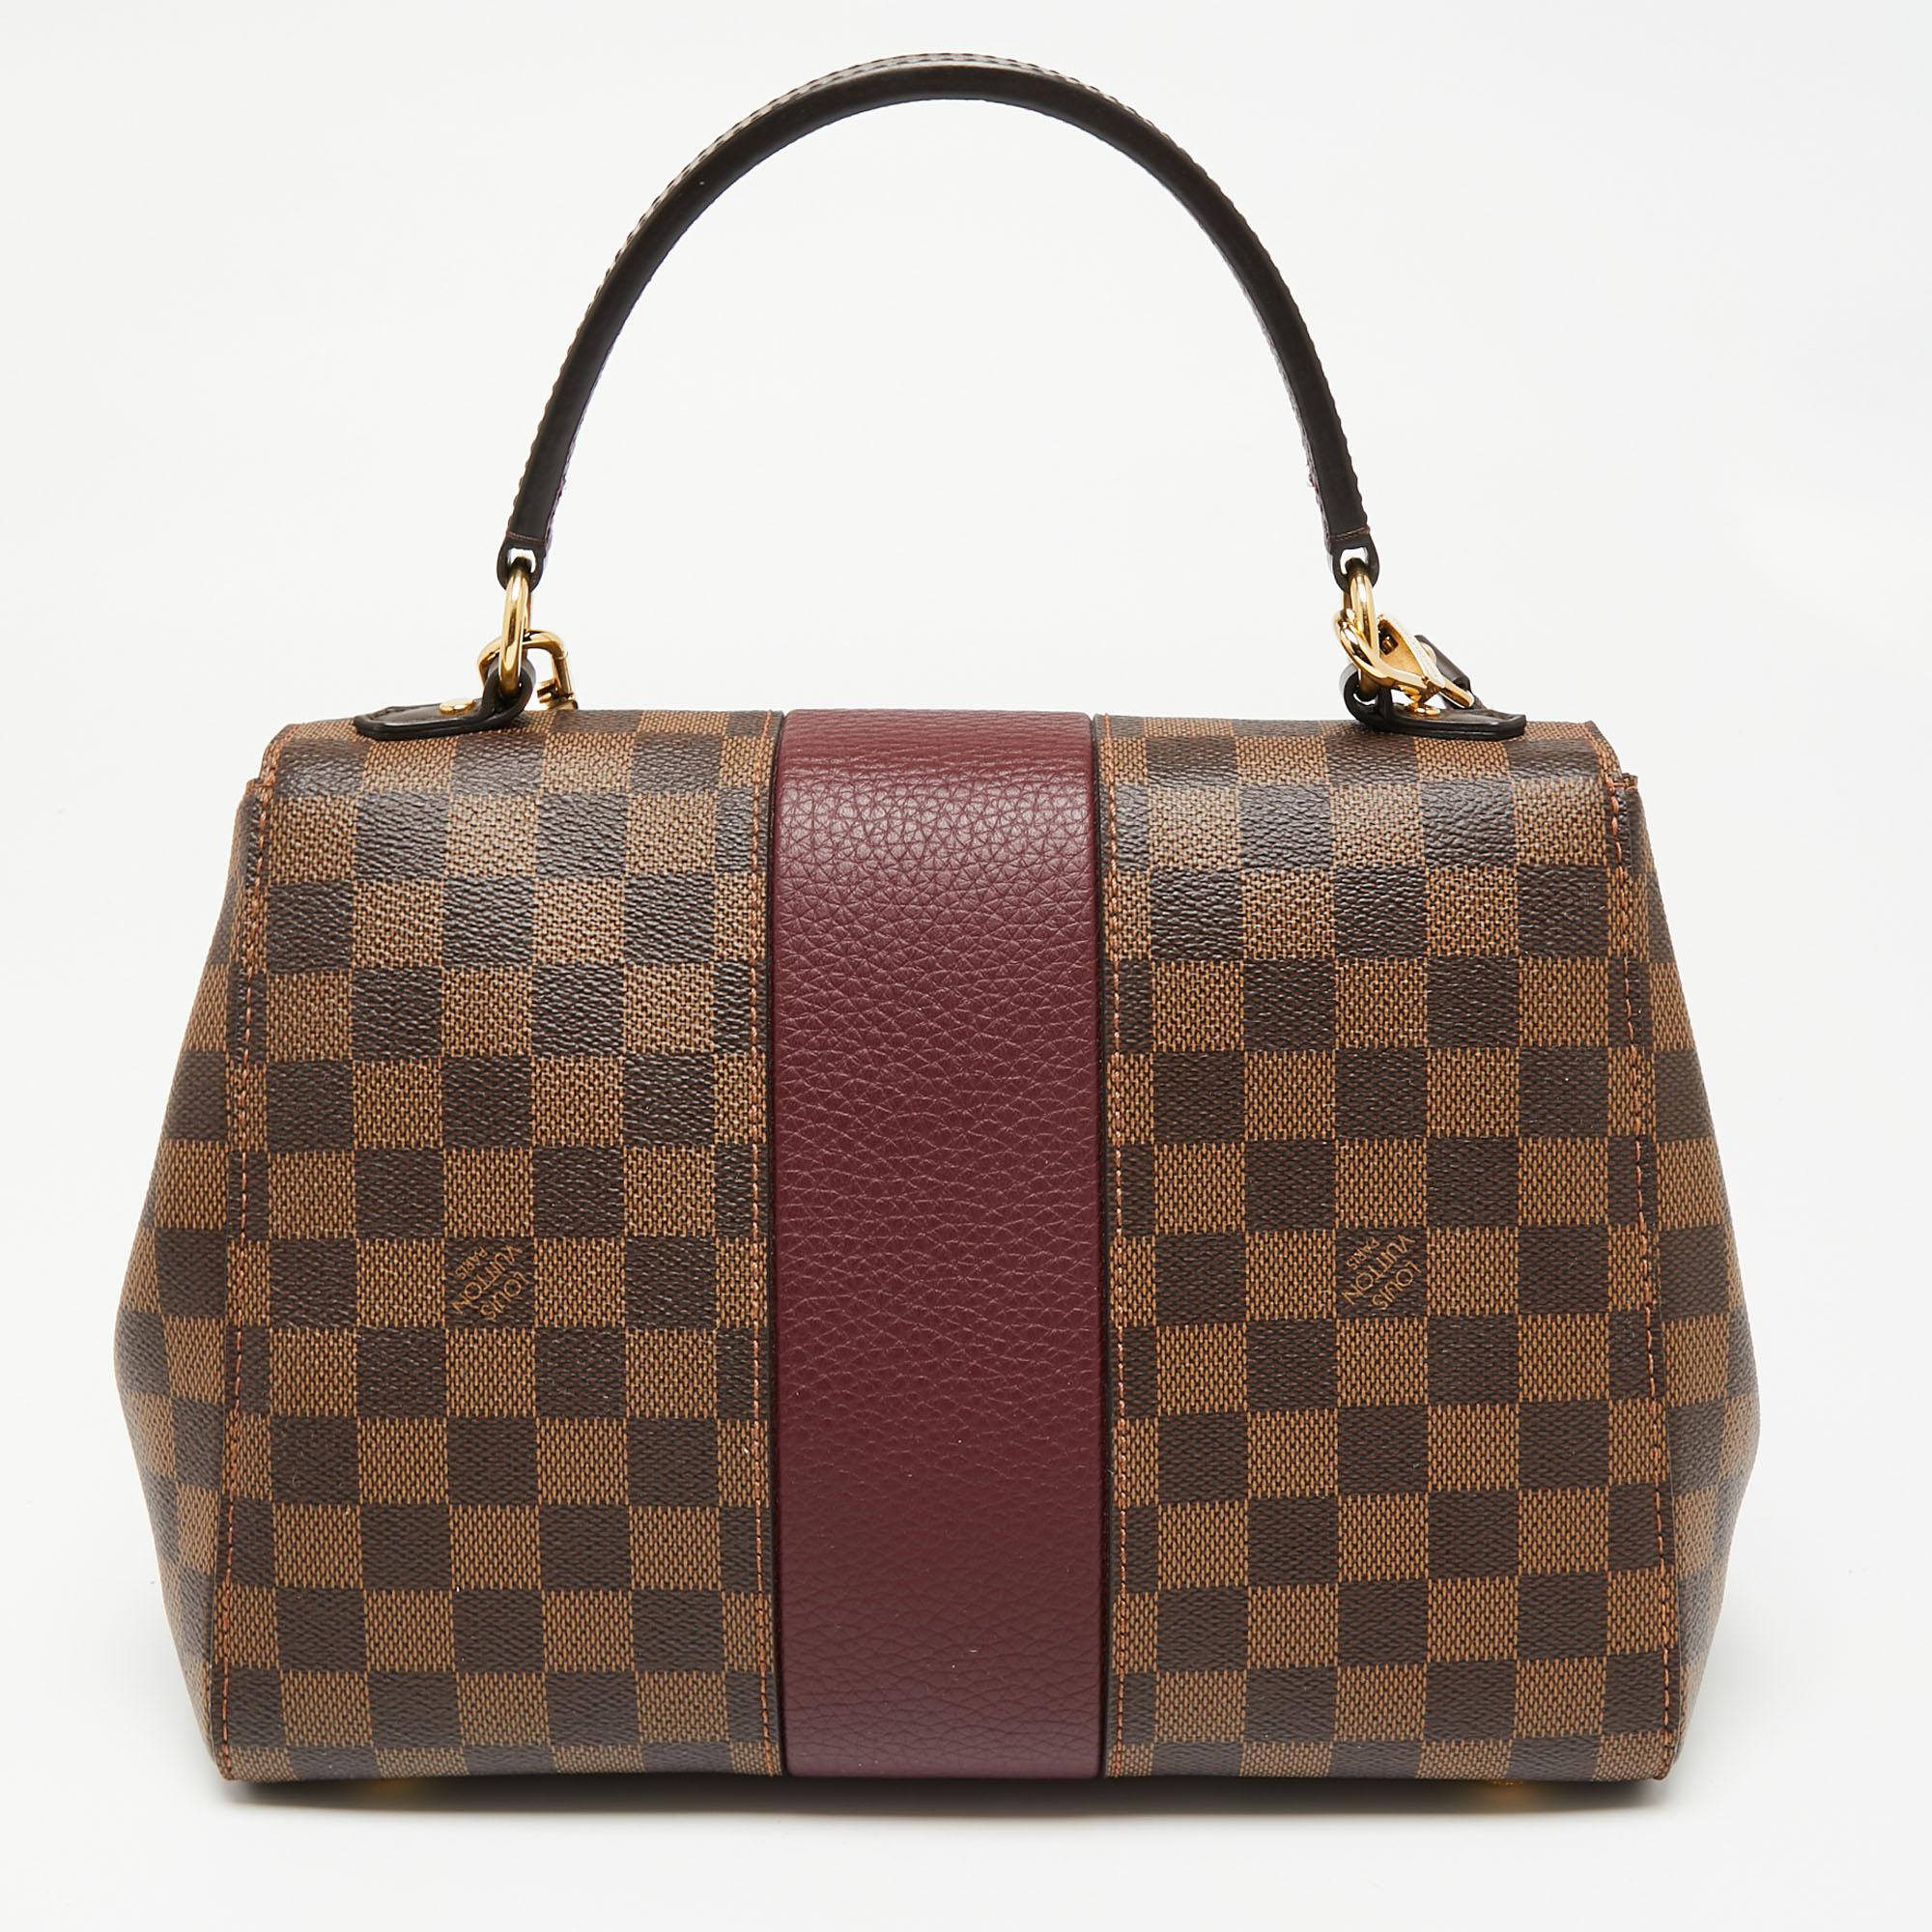 Designed to last, this flap bag from Louis Vuitton can elevate your wardrobe. This functional bag in brown can be used for work or otherwise. Made using coated canvas and leather, it is spacious and high on appeal.

Includes: Detachable Strap